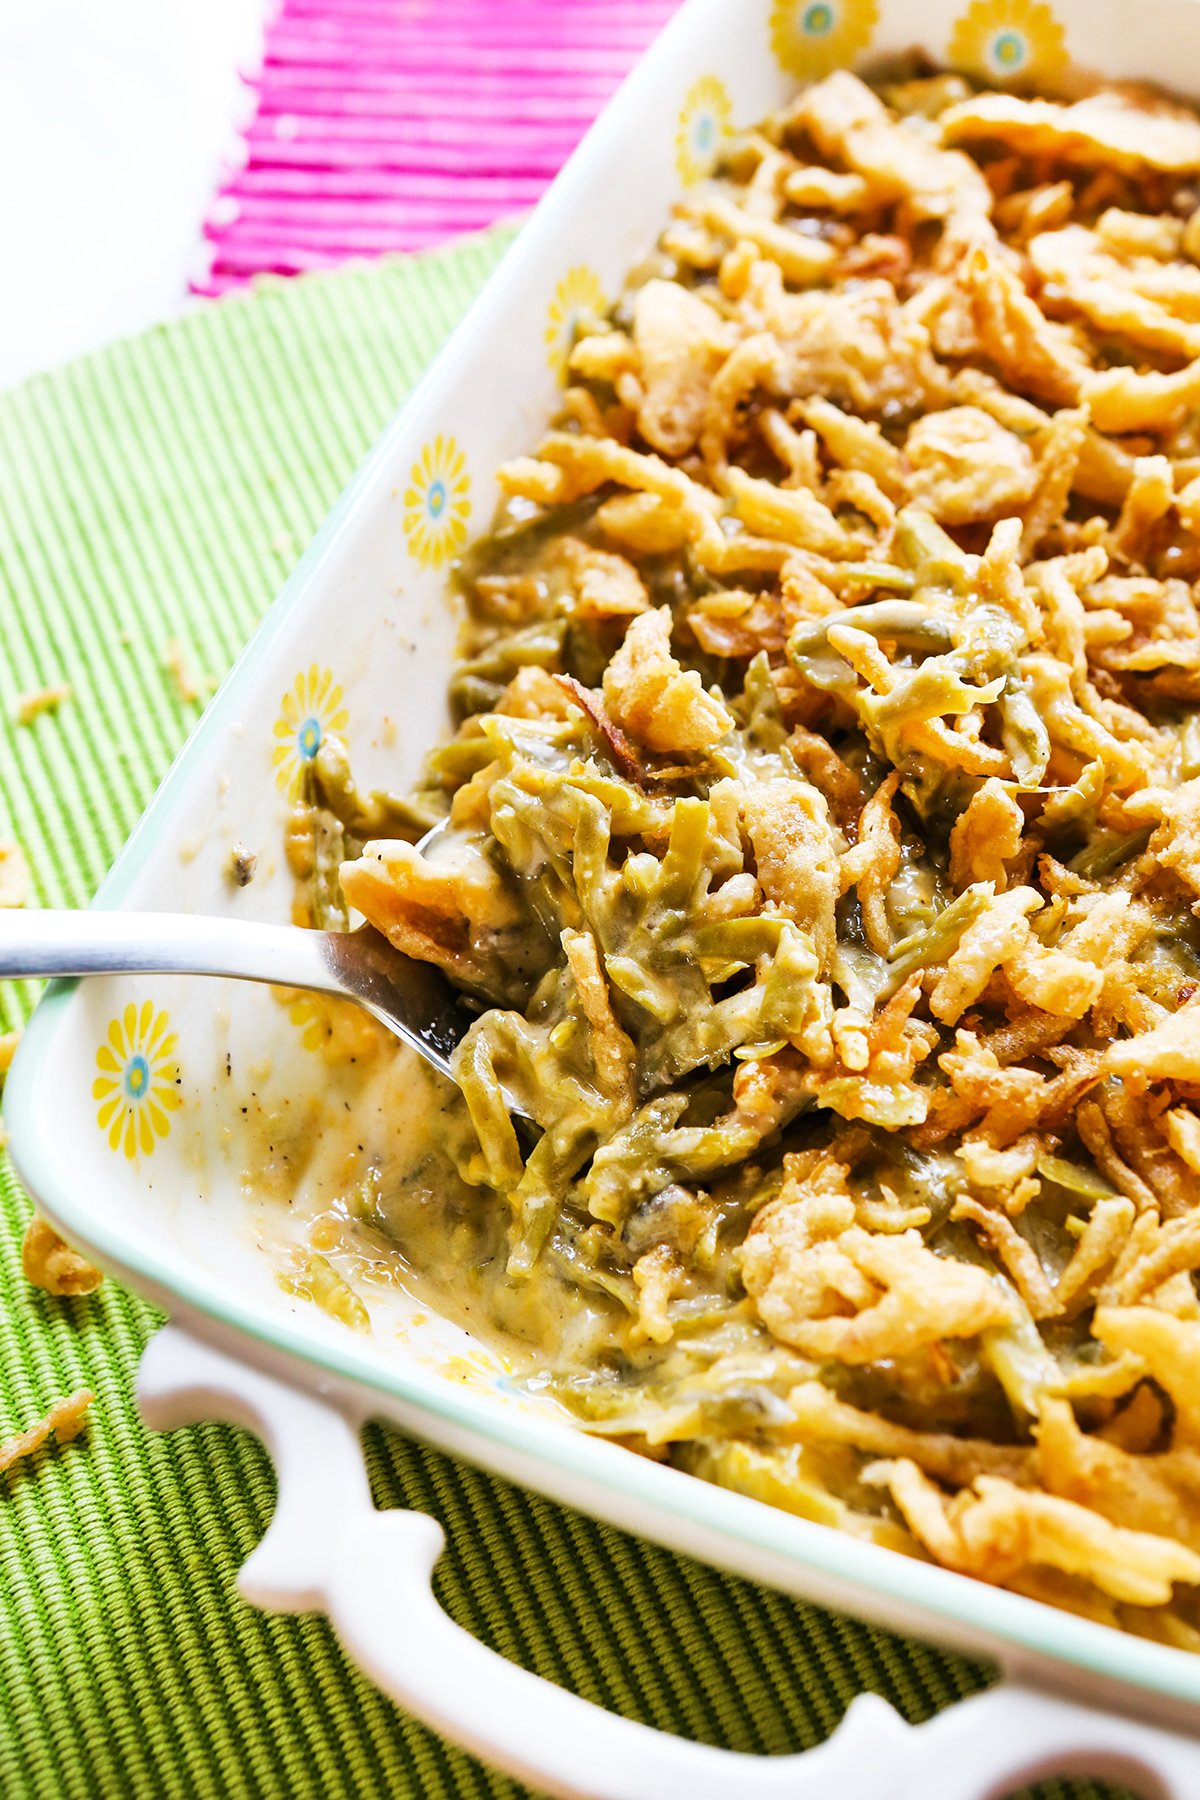 Serving spoon stuck into a dish filled with green bean casserole and crispy fried onions on top.